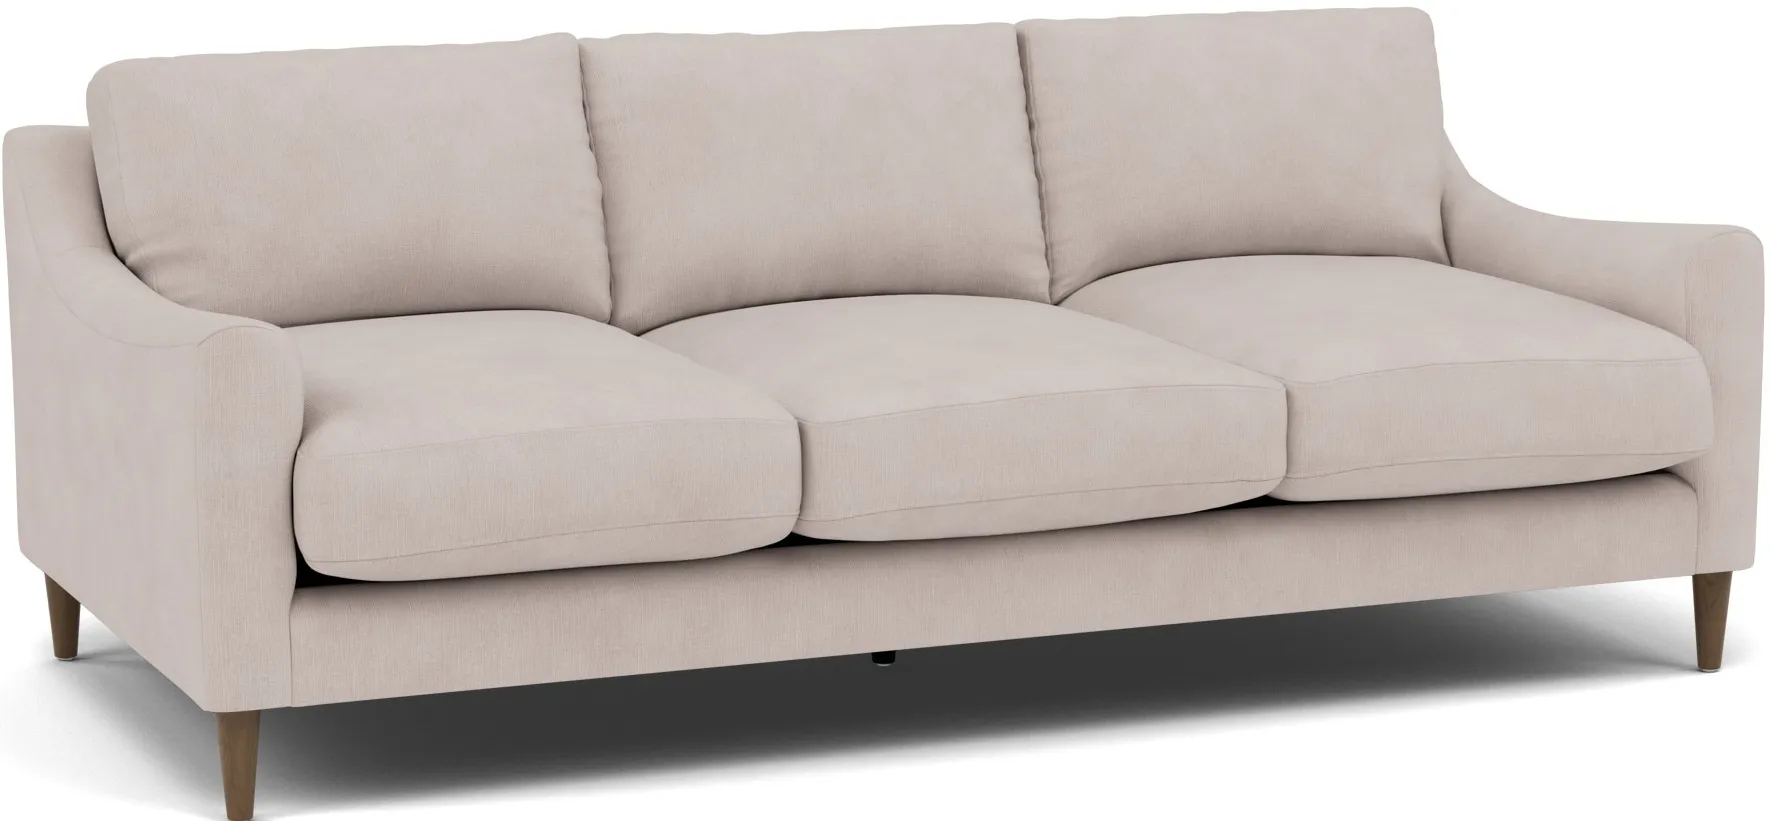 Mostny Sloped Track Arm Sofa Plus in Heavenly Cinder